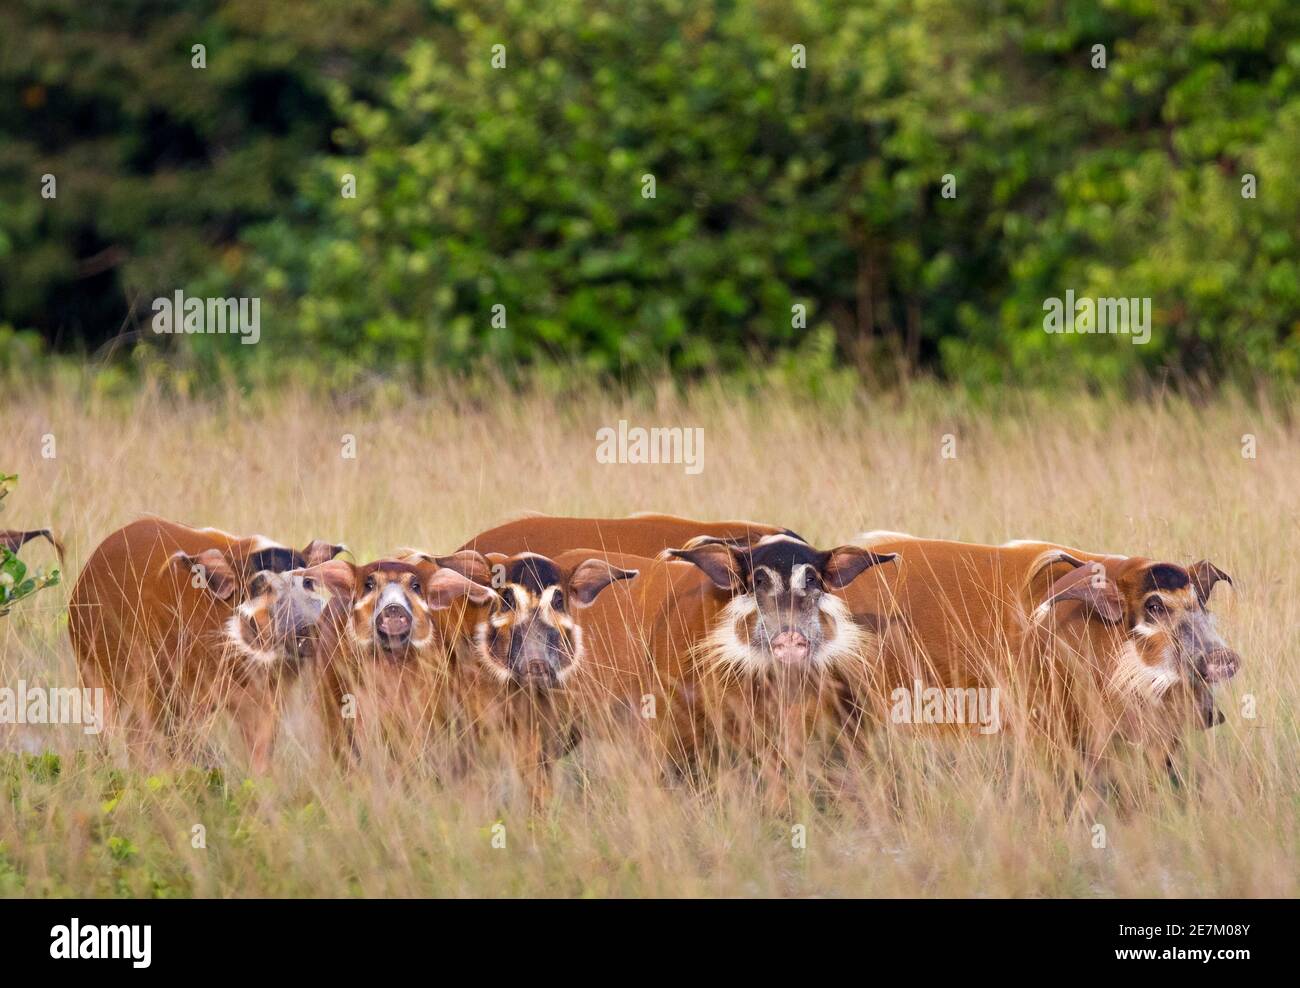 Red River Hog (Potamochoerus porcus) group in long grass, Loango National Park, Gabon, central Africa. Stock Photo